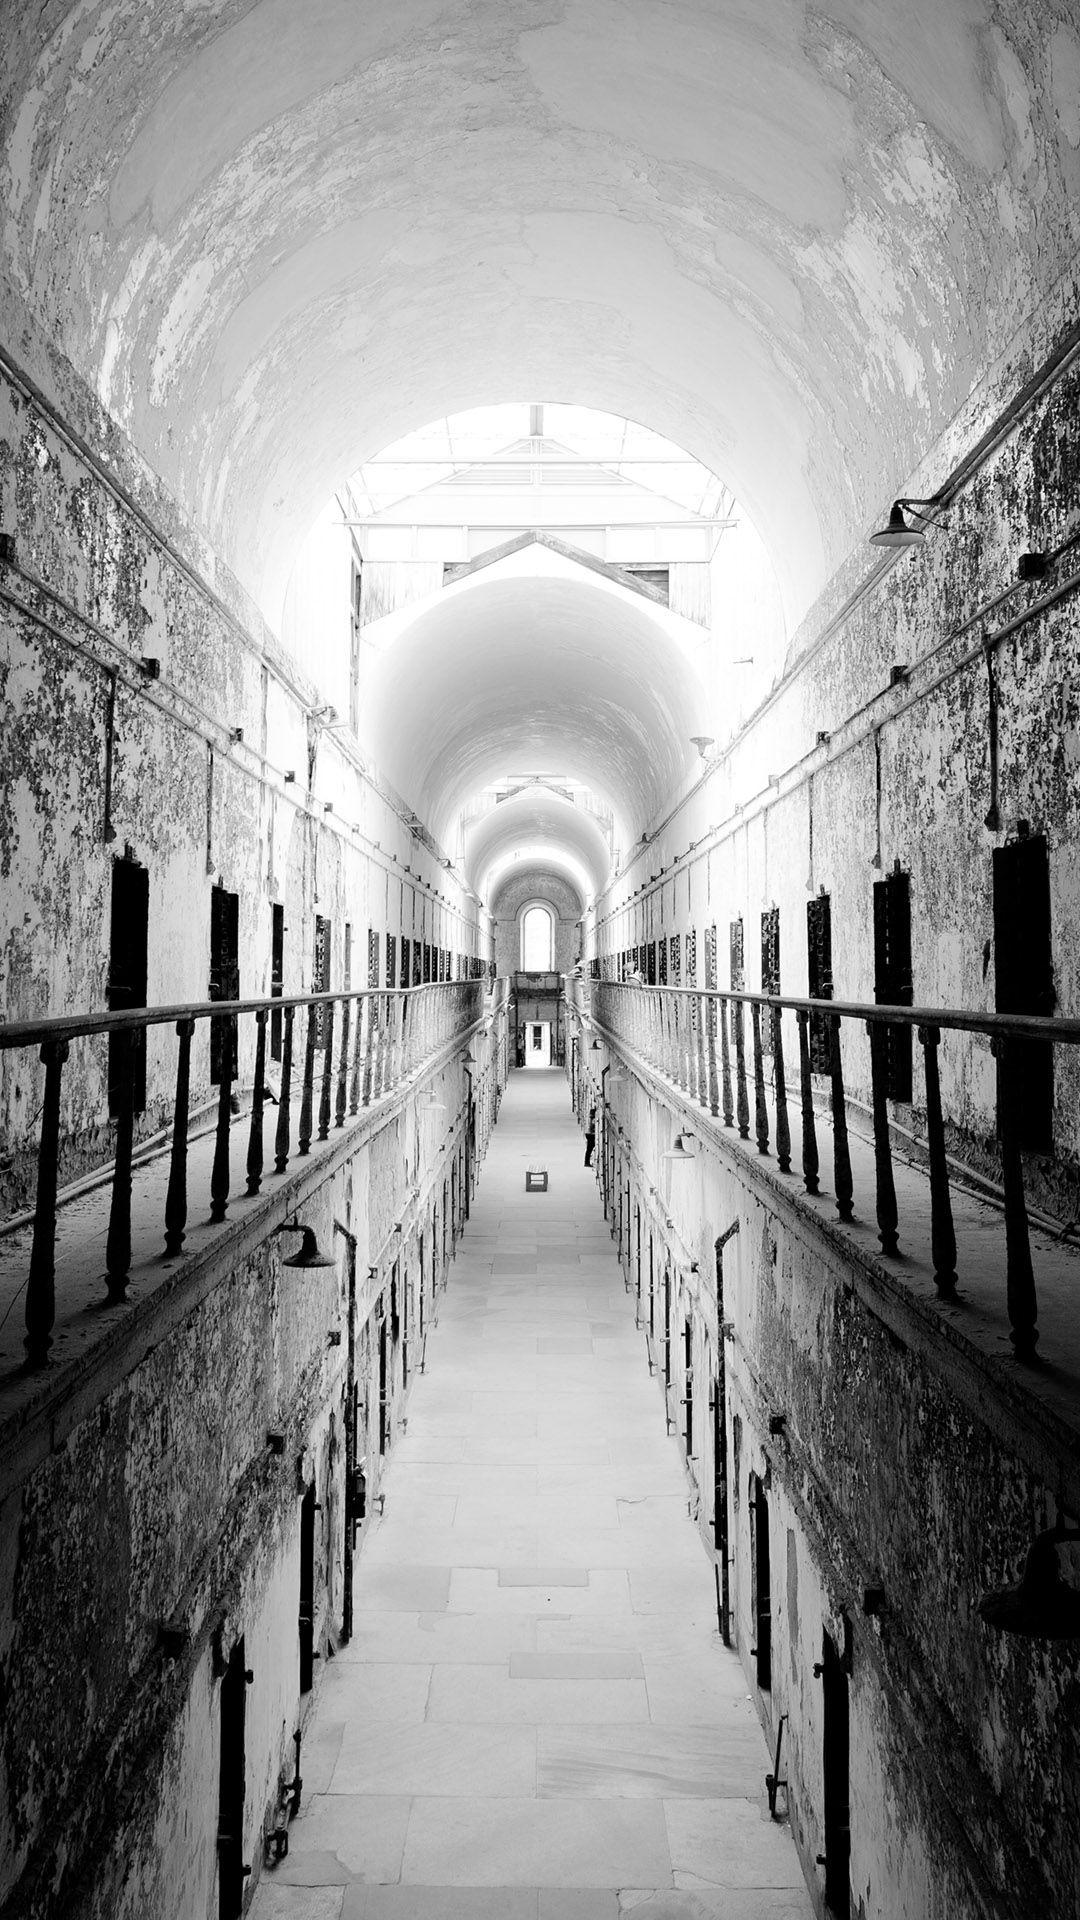 Old Prison Interior Android Wallpaper free download